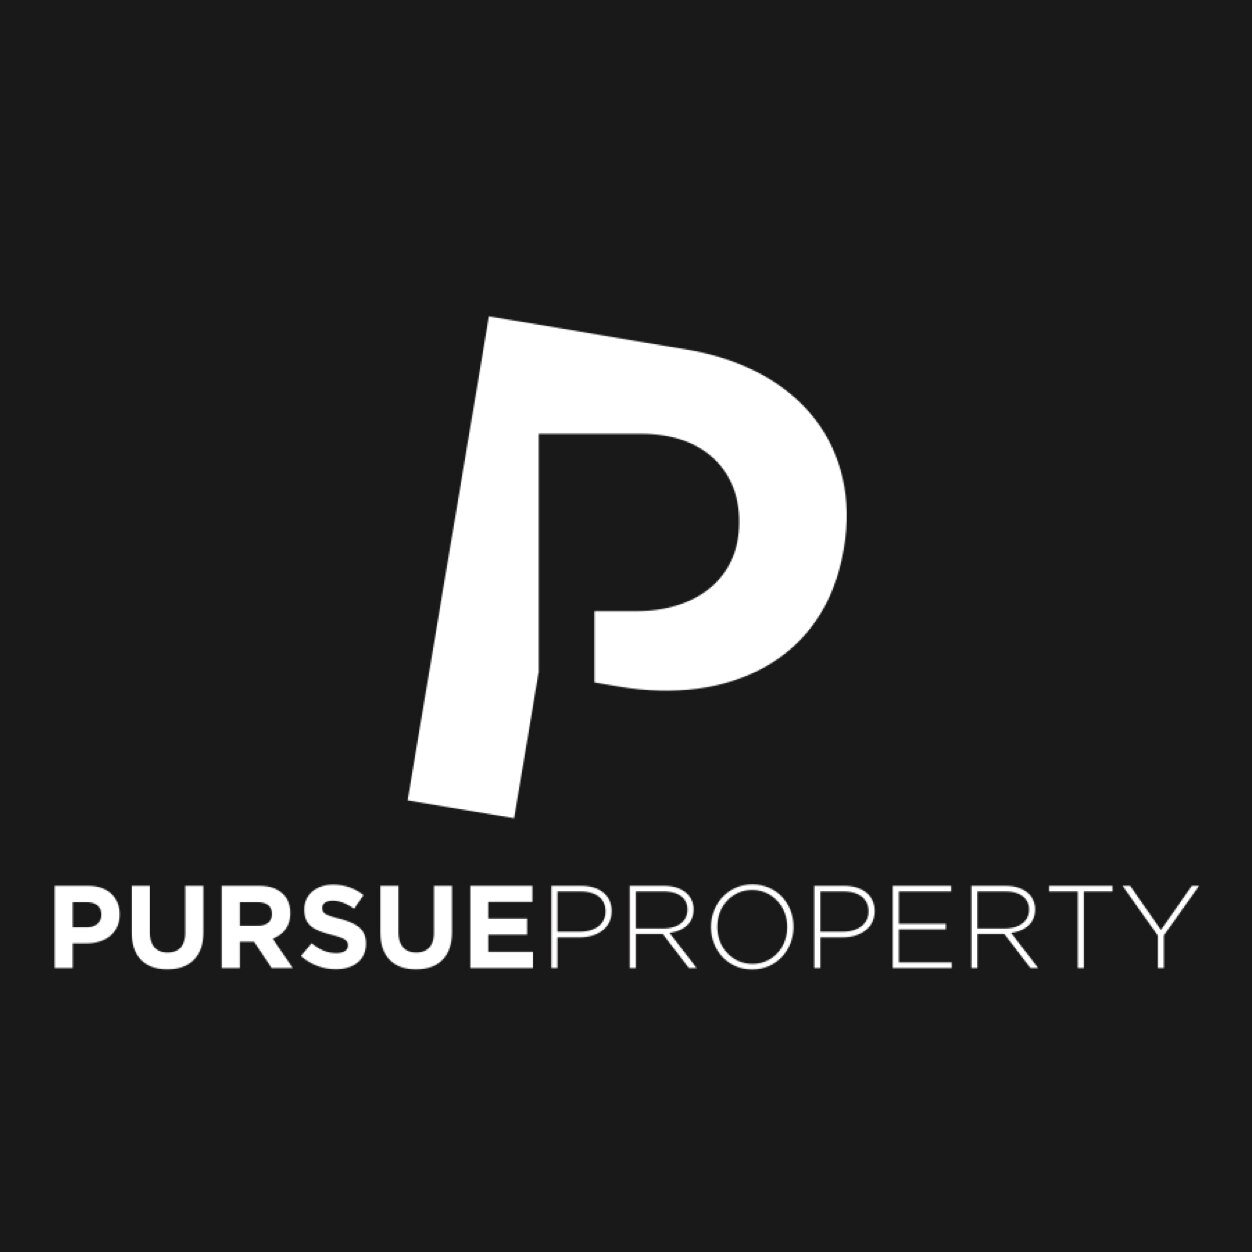 📌 Property Investment & Development Company 📌 Offering Simple, Fast & Guaranteed House Sales 📍London Based - North East Invested